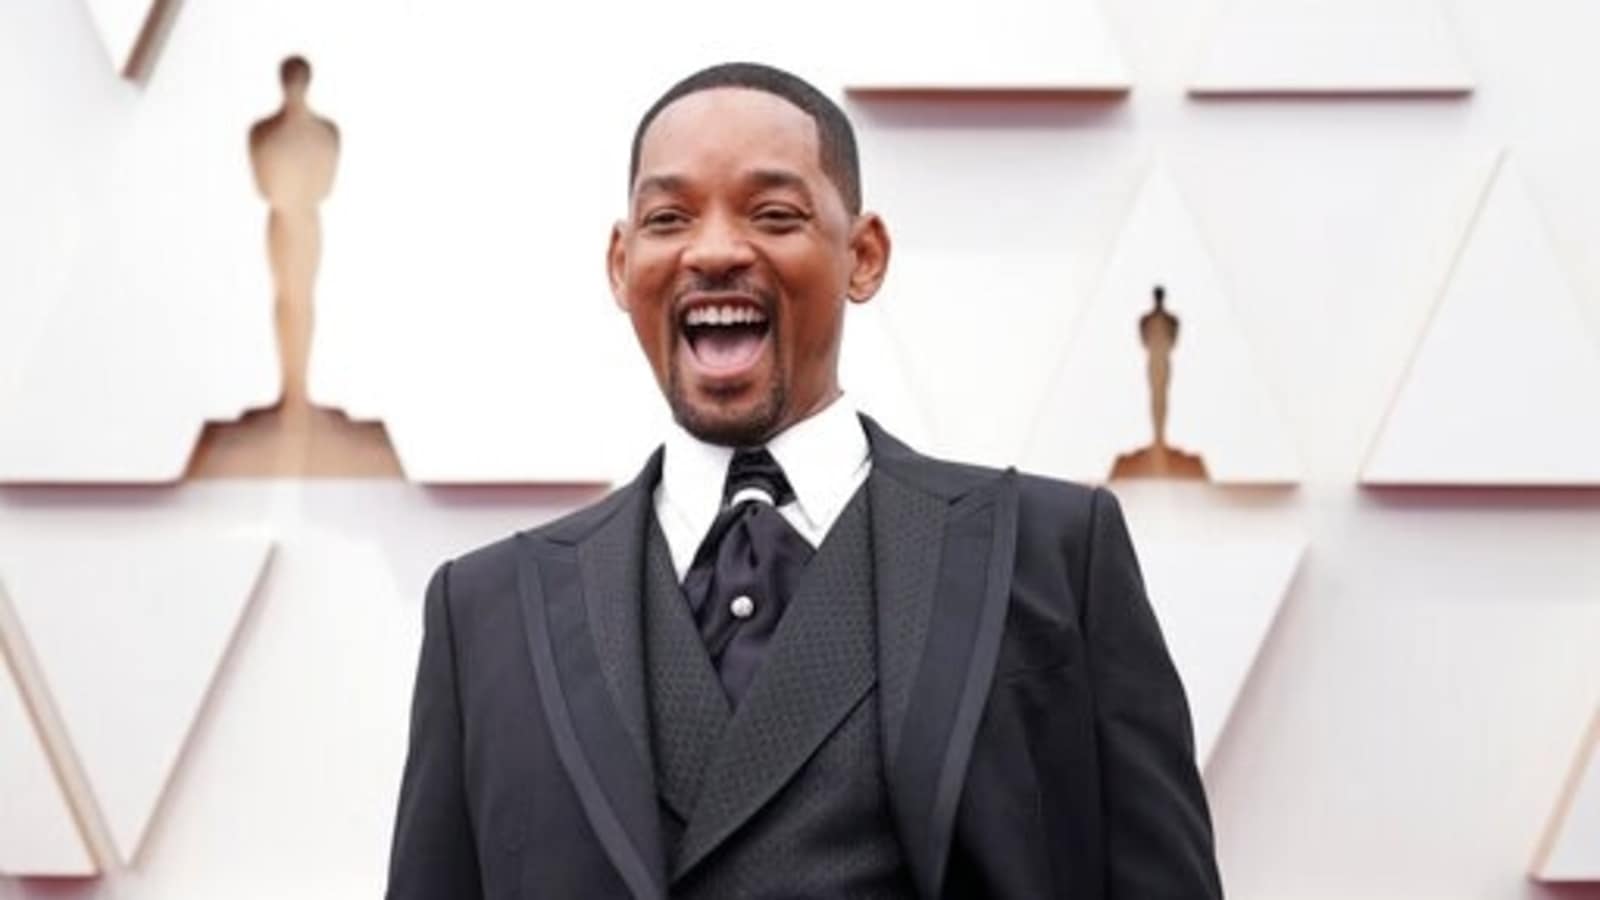 When Will Smith made fun of a bald man on TV, said ‘these are jokes, come on’. Watch video